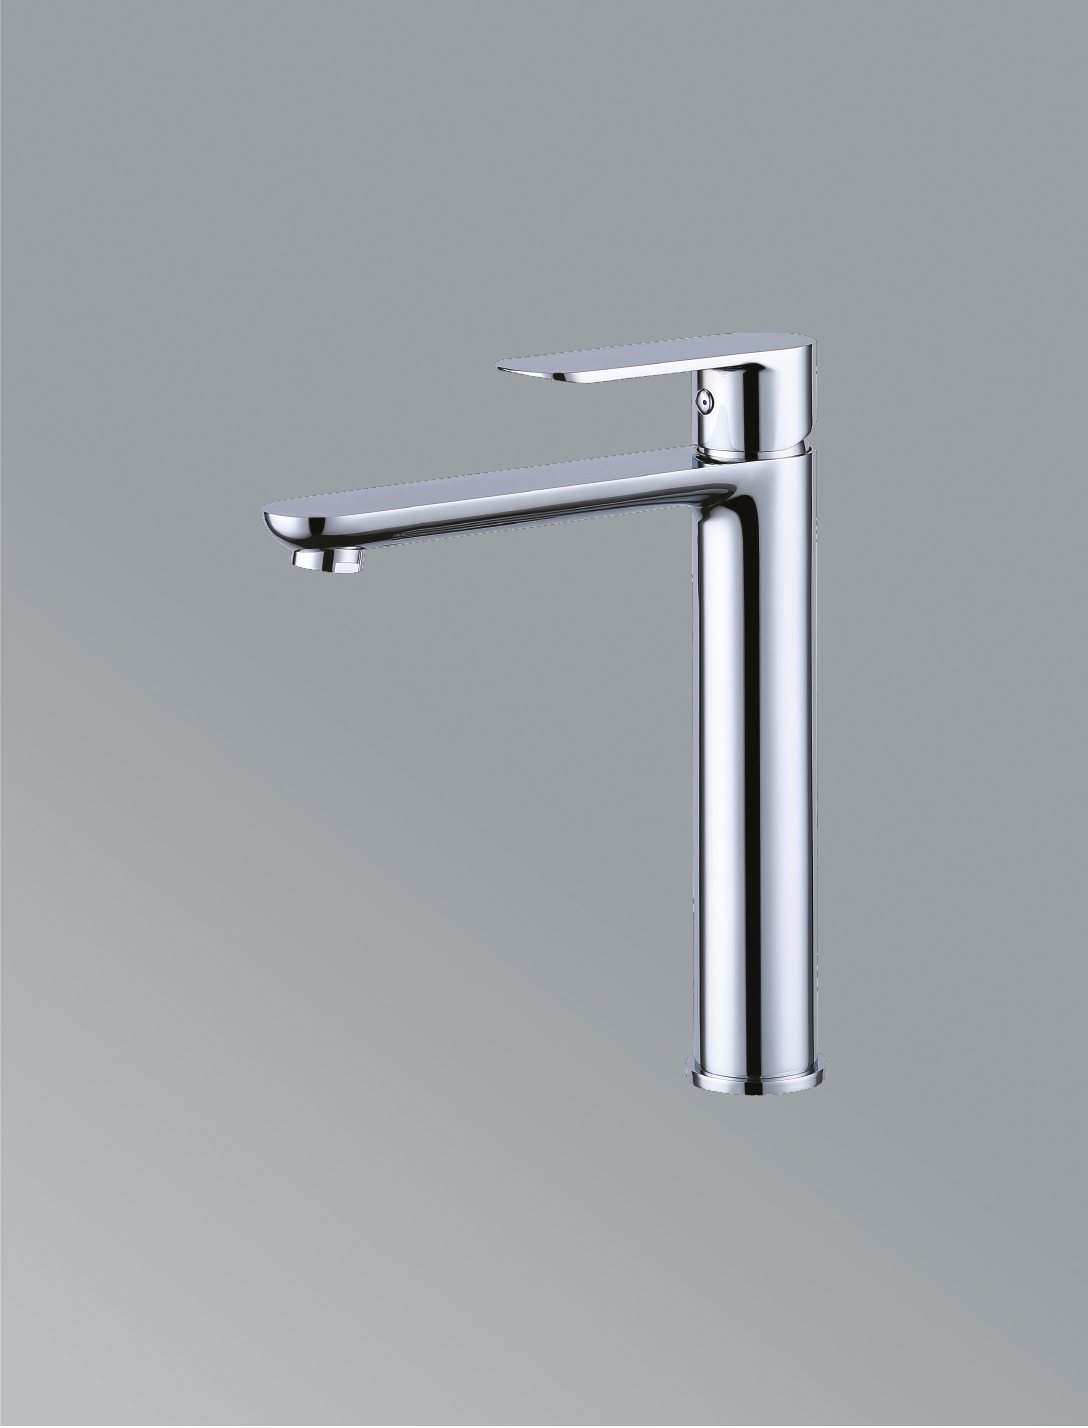  Single Control Basin Faucet Tall In Polished Chrome